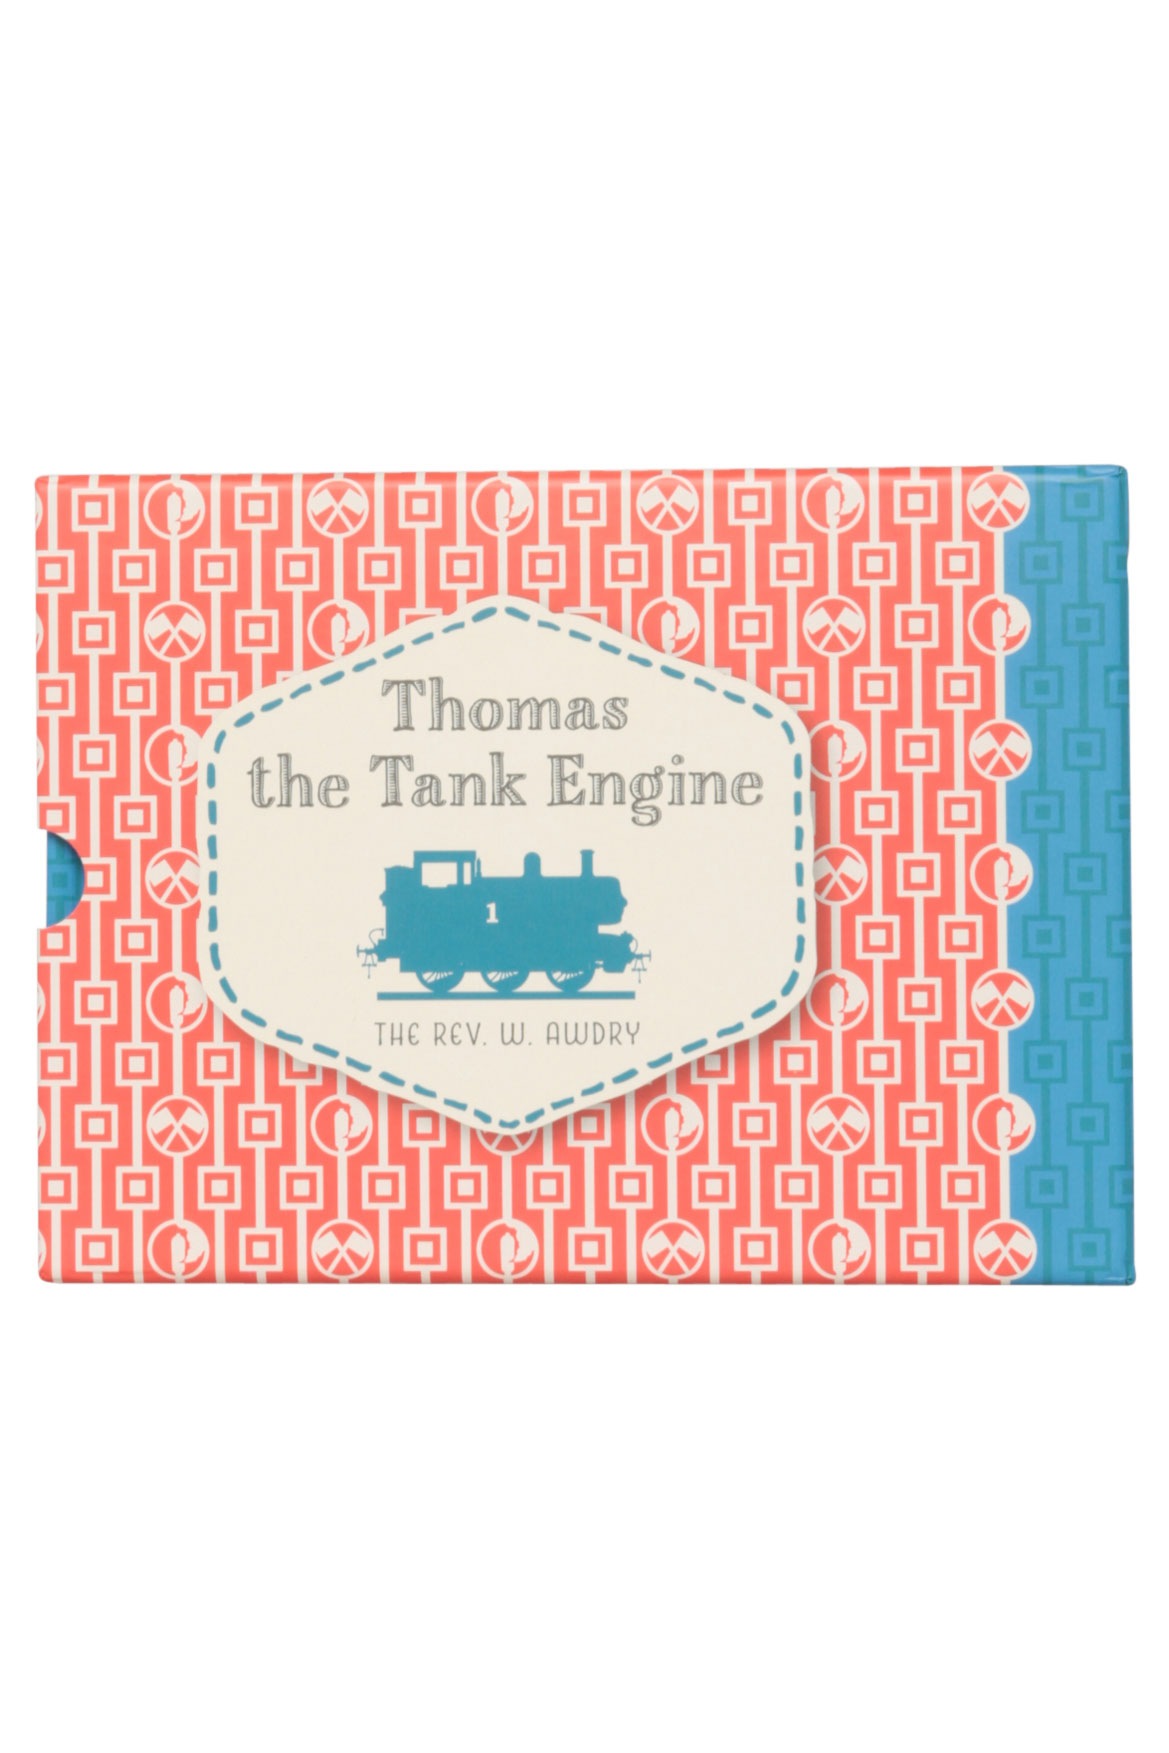  Thomas the Tank Engine Anniversary  Gift  Edition in 